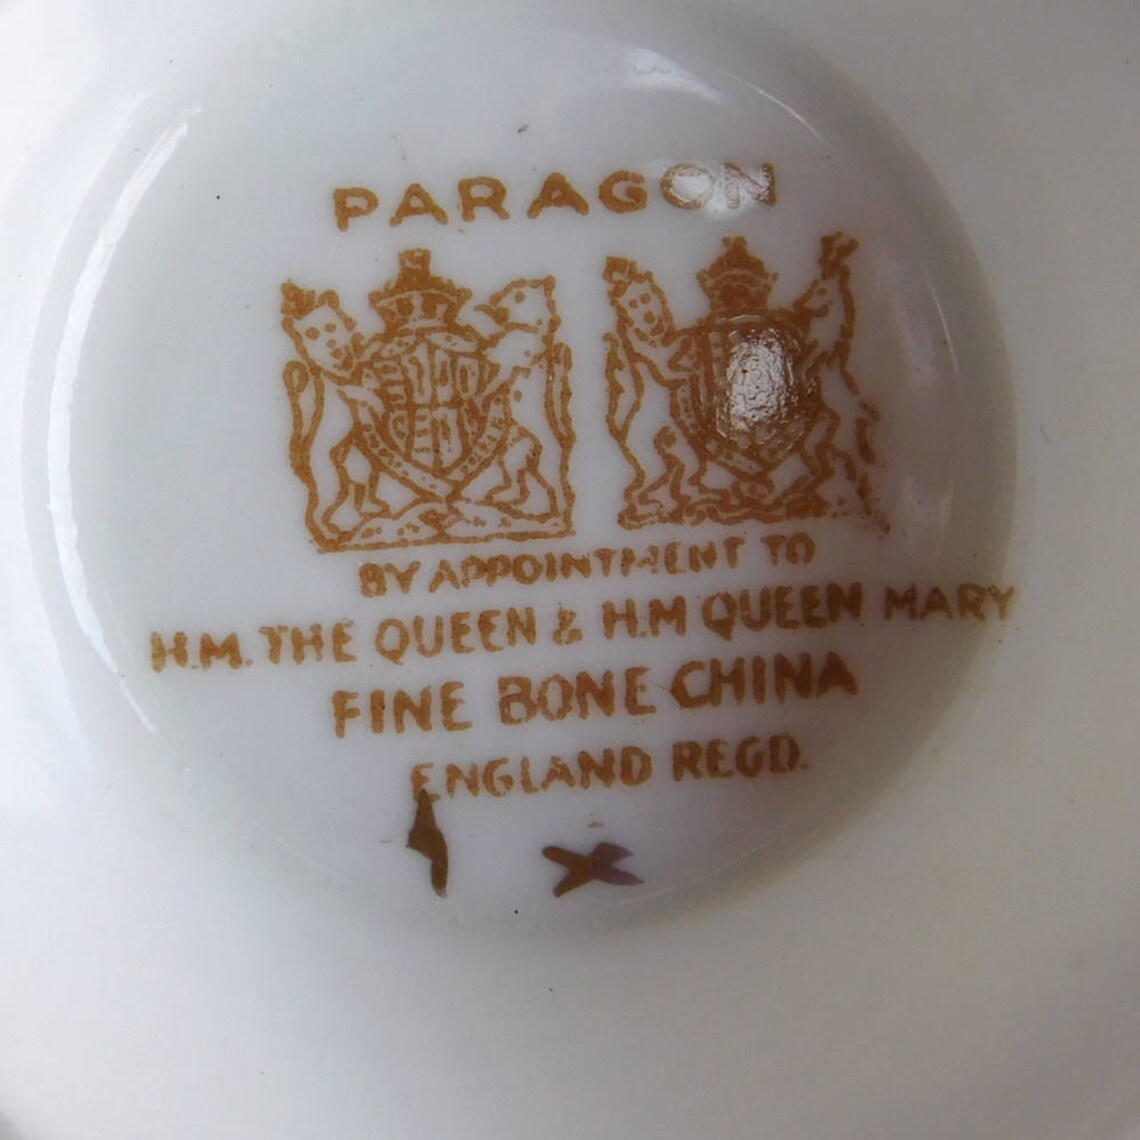 Vintage Paragon Fine Bone China Cup And Saucer Set By Etsy